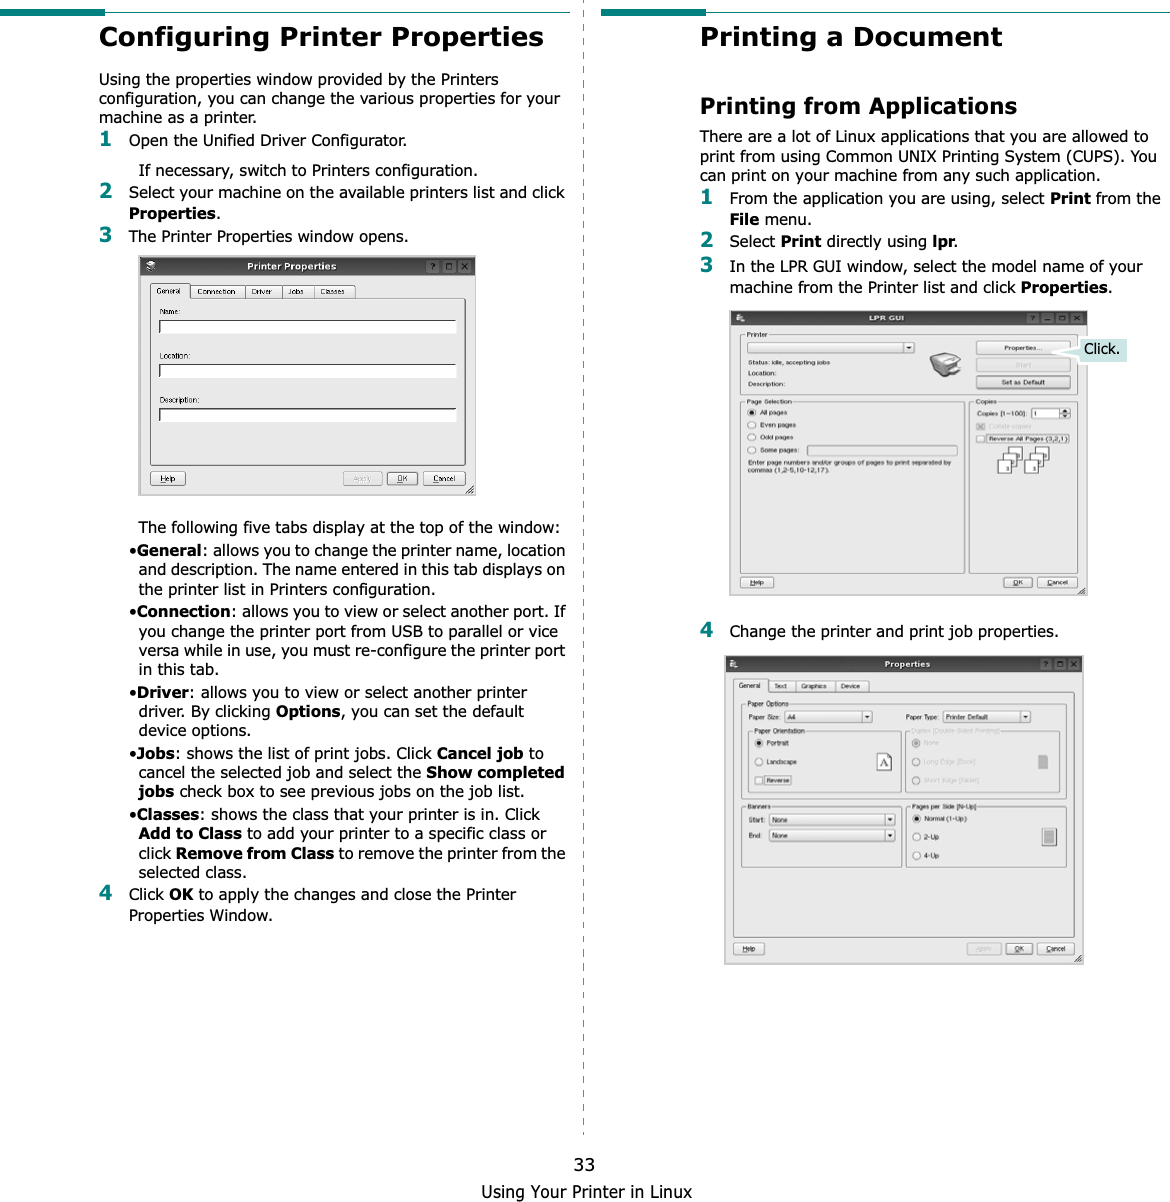 Using Your Printer in Linux33Configuring Printer PropertiesUsing the properties window provided by the Printers configuration, you can change the various properties for your machine as a printer.1Open the Unified Driver Configurator.If necessary, switch to Printers configuration.2Select your machine on the available printers list and click Properties.3The Printer Properties window opens.The following five tabs display at the top of the window:•General: allows you to change the printer name, location and description. The name entered in this tab displays on the printer list in Printers configuration.•Connection: allows you to view or select another port. If you change the printer port from USB to parallel or vice versa while in use, you must re-configure the printer port in this tab.•Driver: allows you to view or select another printer driver. By clicking Options, you can set the default device options.•Jobs: shows the list of print jobs. Click Cancel job to cancel the selected job and select the Show completed jobs check box to see previous jobs on the job list.•Classes: shows the class that your printer is in. Click Add to Class to add your printer to a specific class or click Remove from Class to remove the printer from the selected class.4Click OK to apply the changes and close the Printer Properties Window.Printing a DocumentPrinting from ApplicationsThere are a lot of Linux applications that you are allowed to print from using Common UNIX Printing System (CUPS). You can print on your machine from any such application.1From the application you are using, select Print from the File menu.2Select Print directly using lpr.3In the LPR GUI window, select the model name of your machine from the Printer list and click Properties.4Change the printer and print job properties.Click.